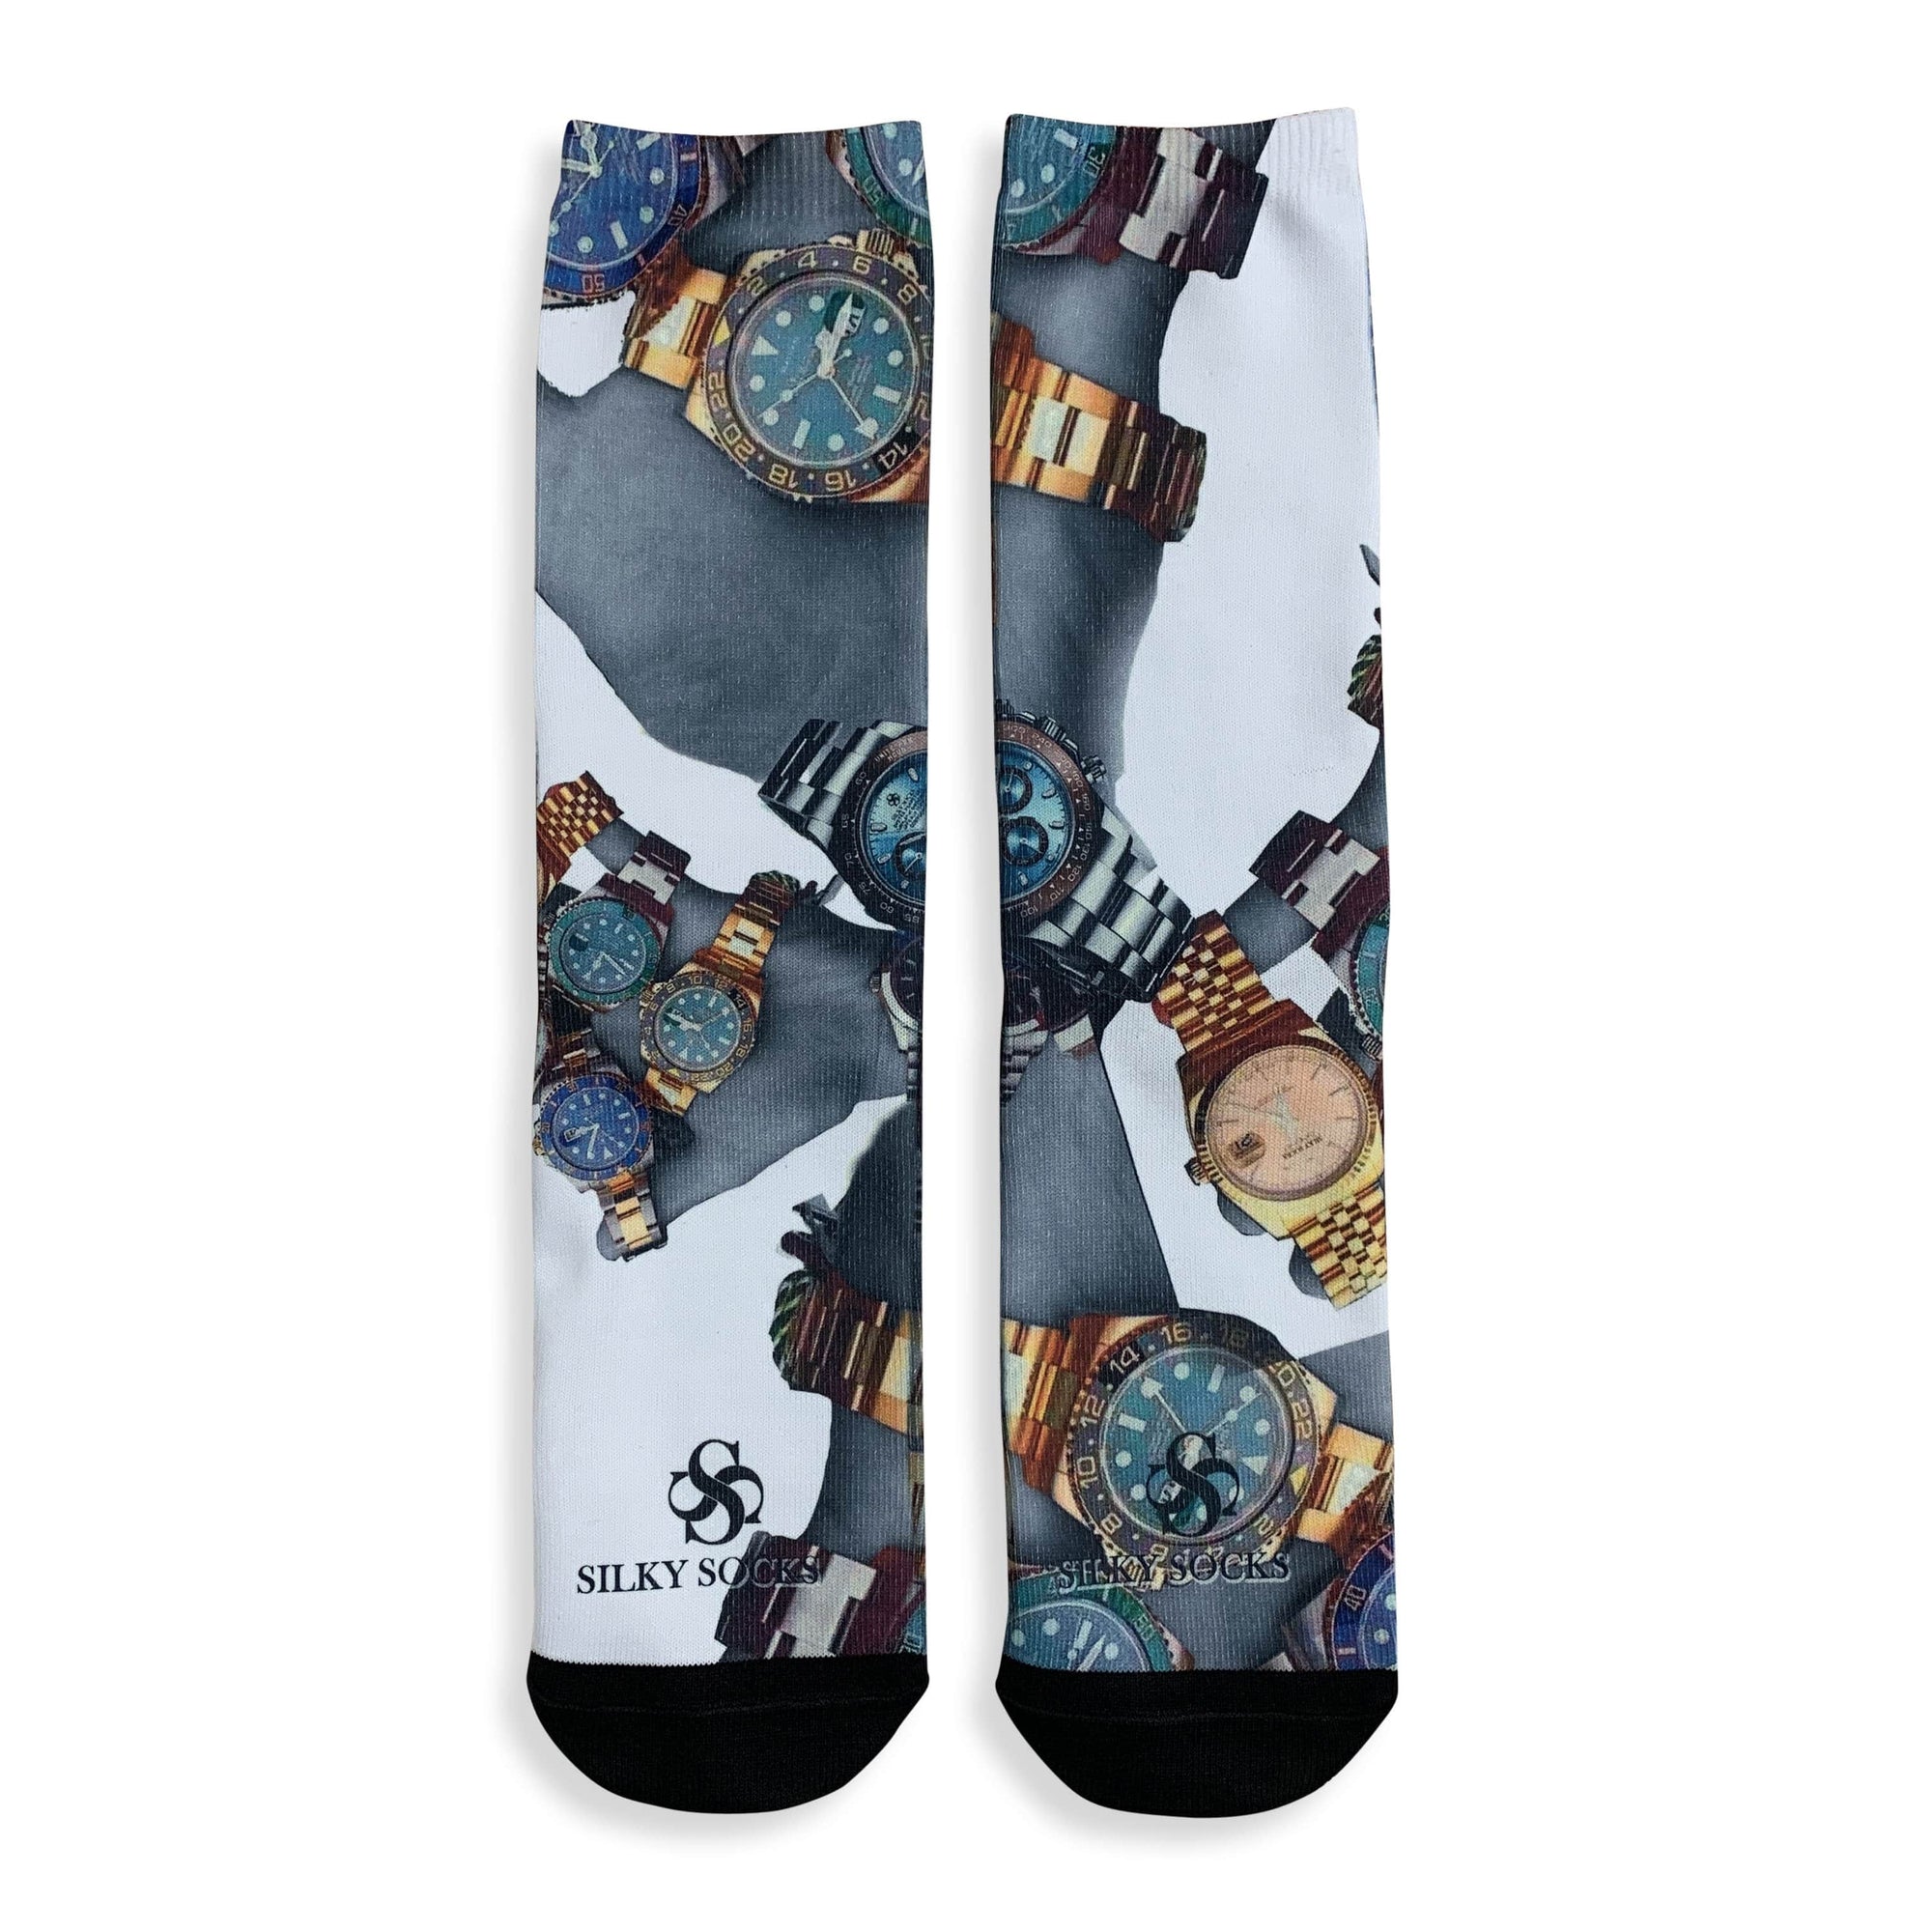 Sublimation Mens Dress Socks, 12 Each Blank Adult, 12 Pair, Made in USA - Medium Size 9-11